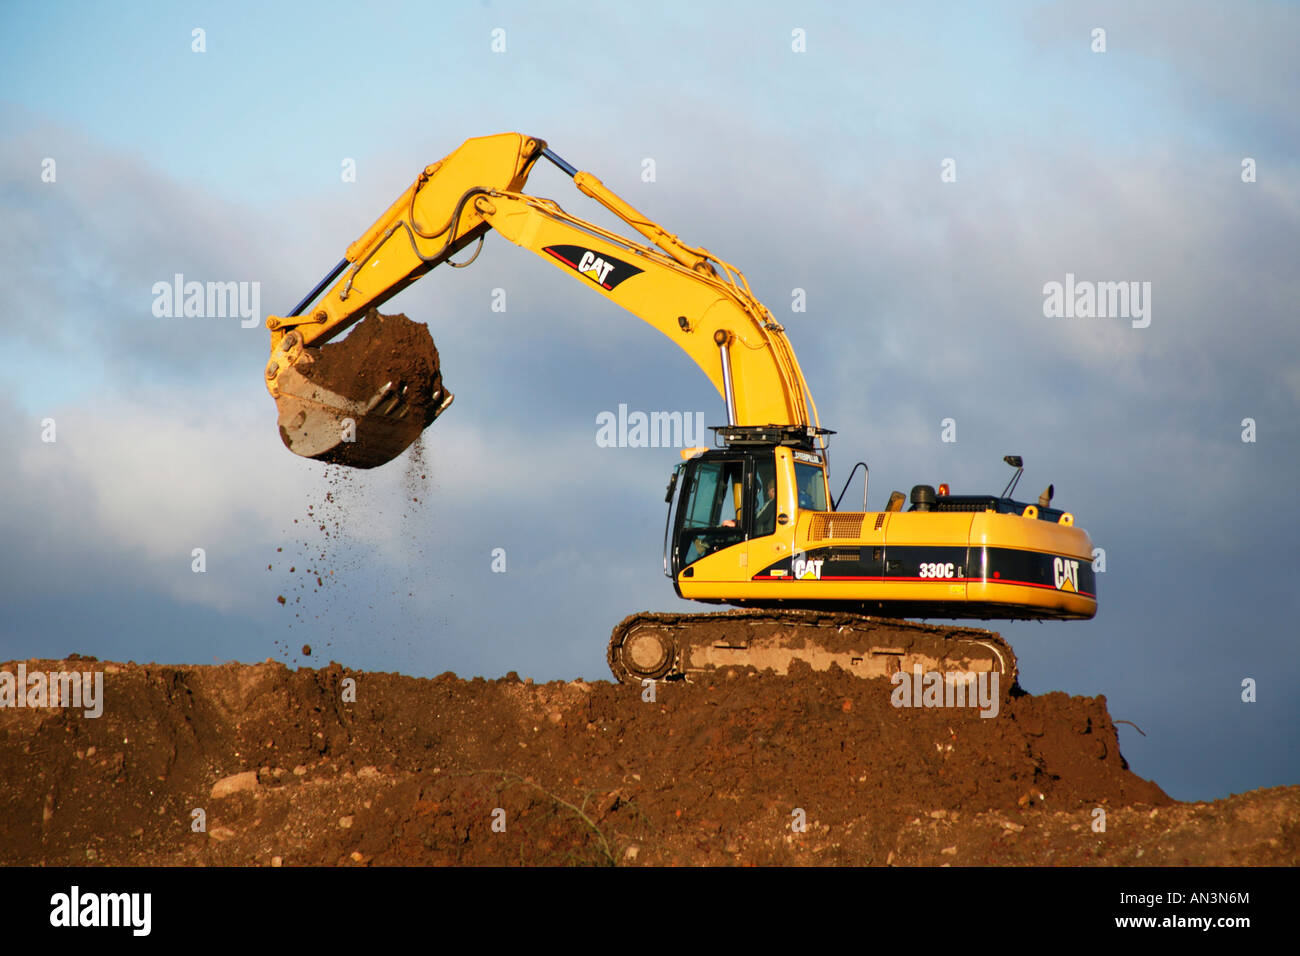 Caterpillar 330c tracked excavator at work on a building site excavating soil Stock Photo